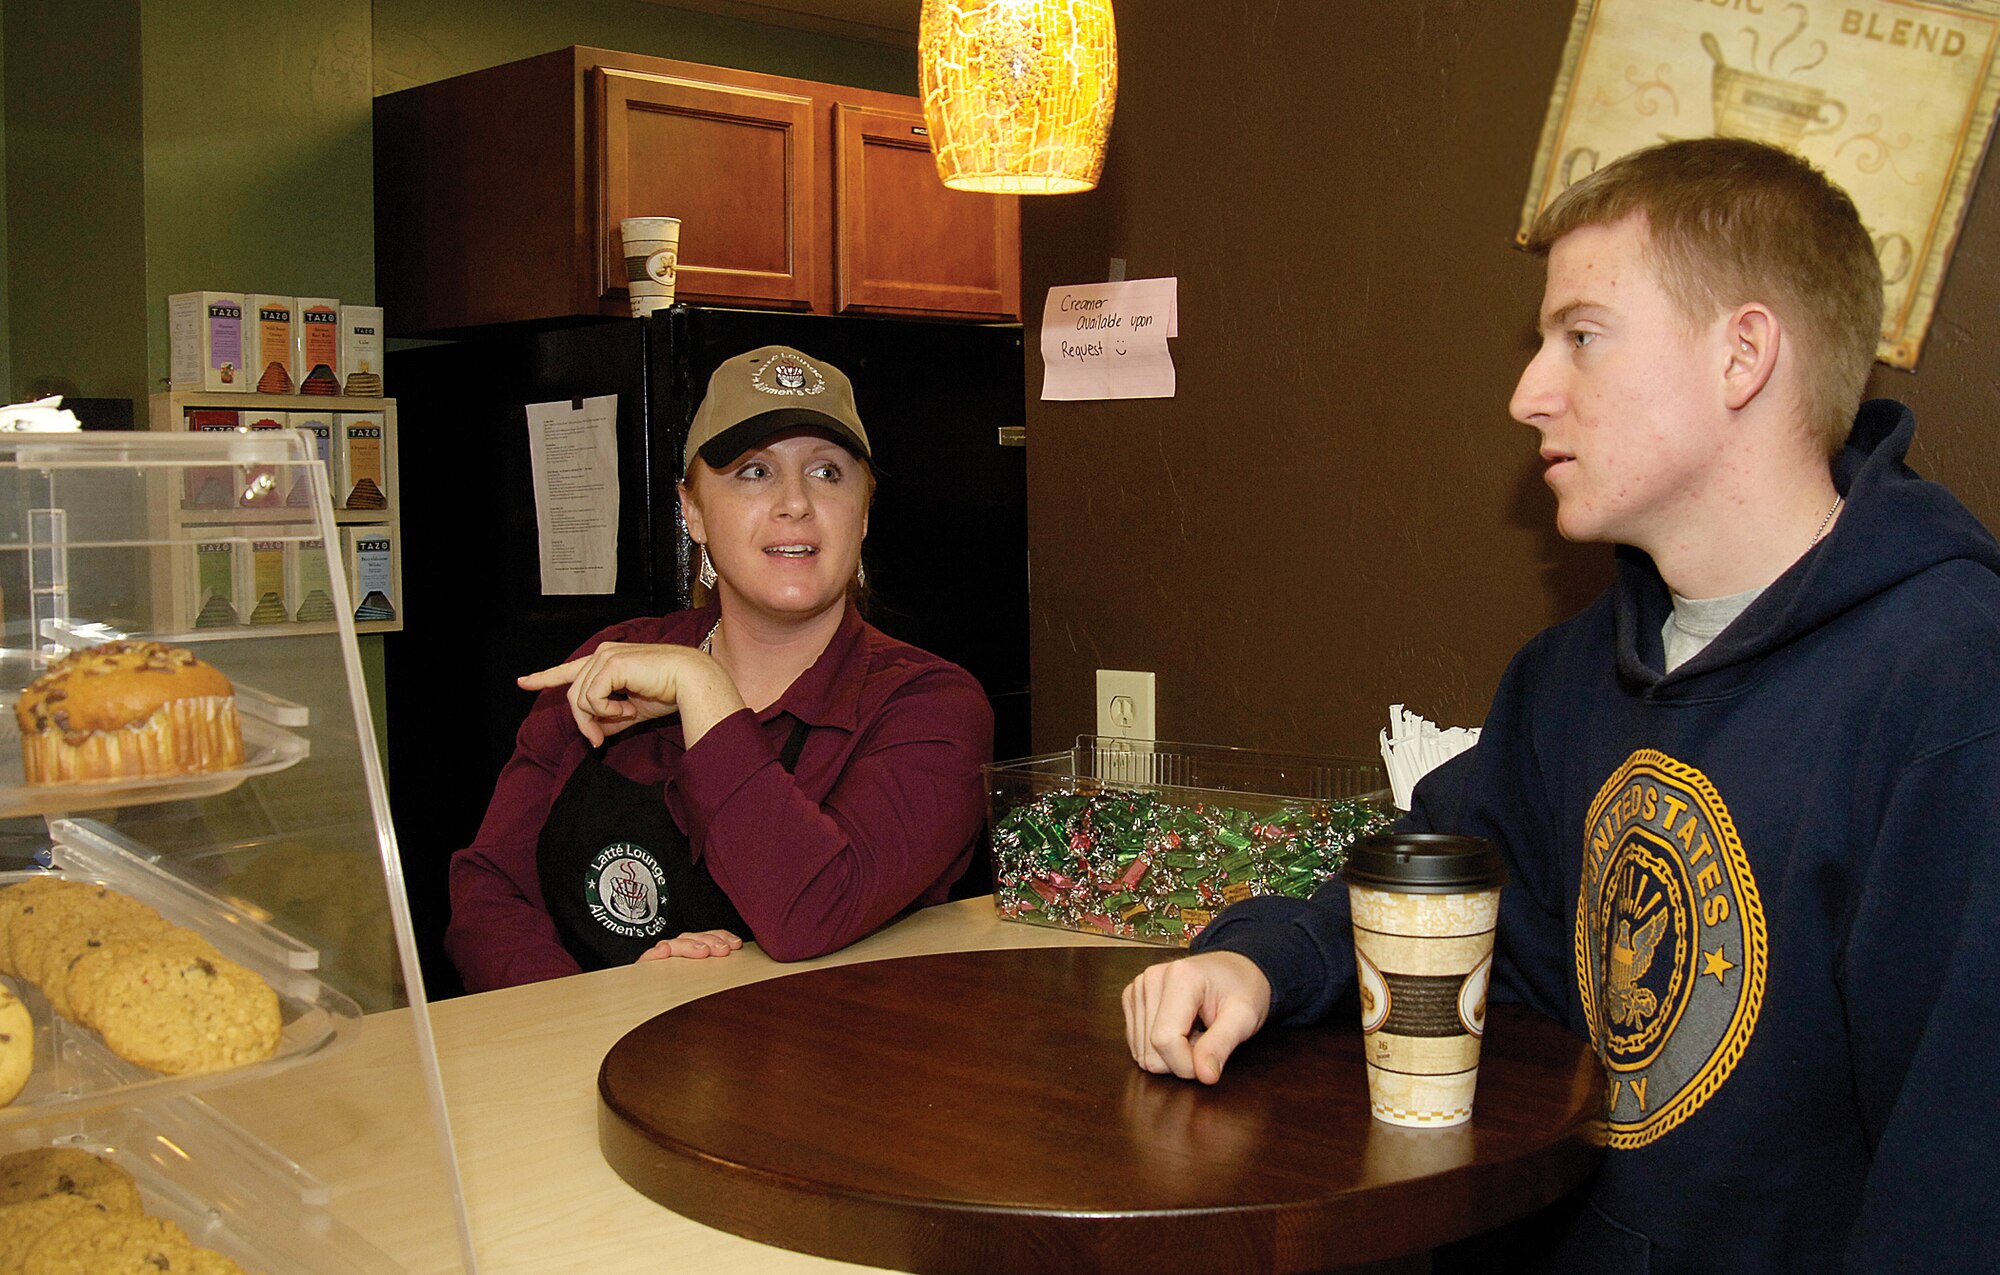 On a cold Friday night, Navy Fleet Reconnaissance THREE Airman Michael Wilson gets a free coffee and a warm, friendly greeting by volunteer Staff Sgt. Lisa Vincelette at the chapel-sponsored Latté Lounge. Located in Loop Hall, Bldg. 5913, the lounge offers Airmen a positive, upscale place to play billiards or electronic games, meet friends and get free café-type refreshments. Sergeant Vincelette is an IMA and chaplain assistant who also donates many hours at the Lounge. She says being a part of such an outreach is exciting. “It charges me,” she says. “You know, they say it’s more blessed to give than receive.” (Air Force photo by Margo Wright)

